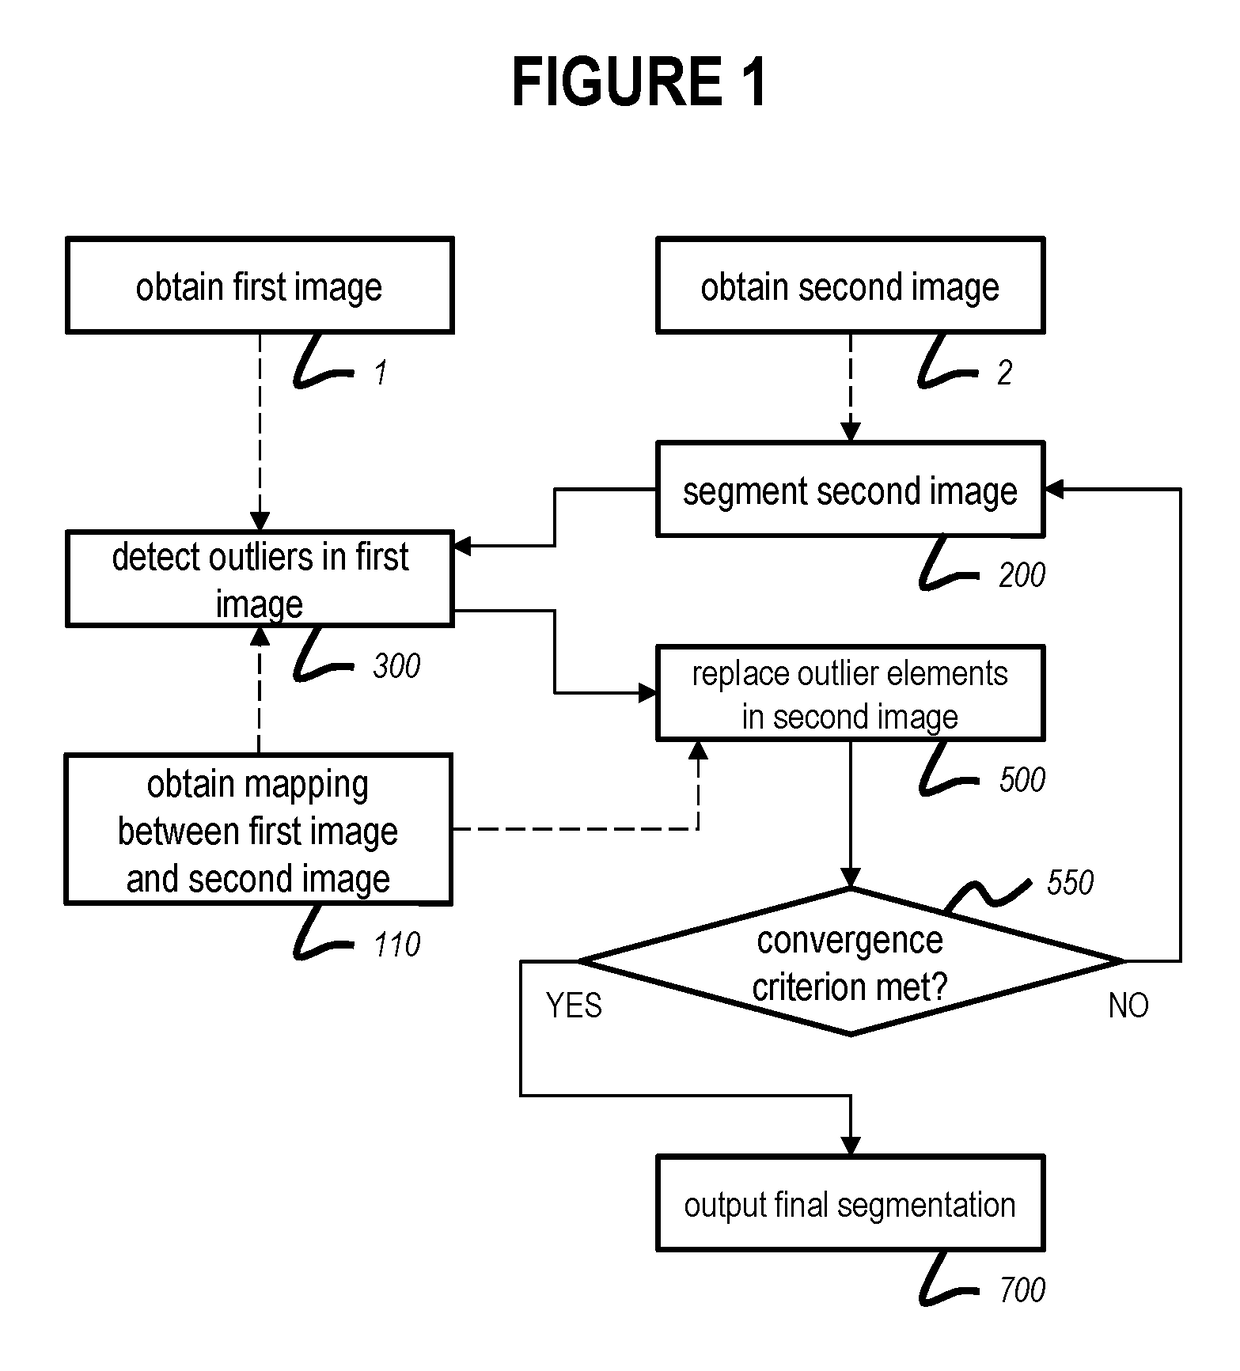 Method and System for Analyzing Image Data